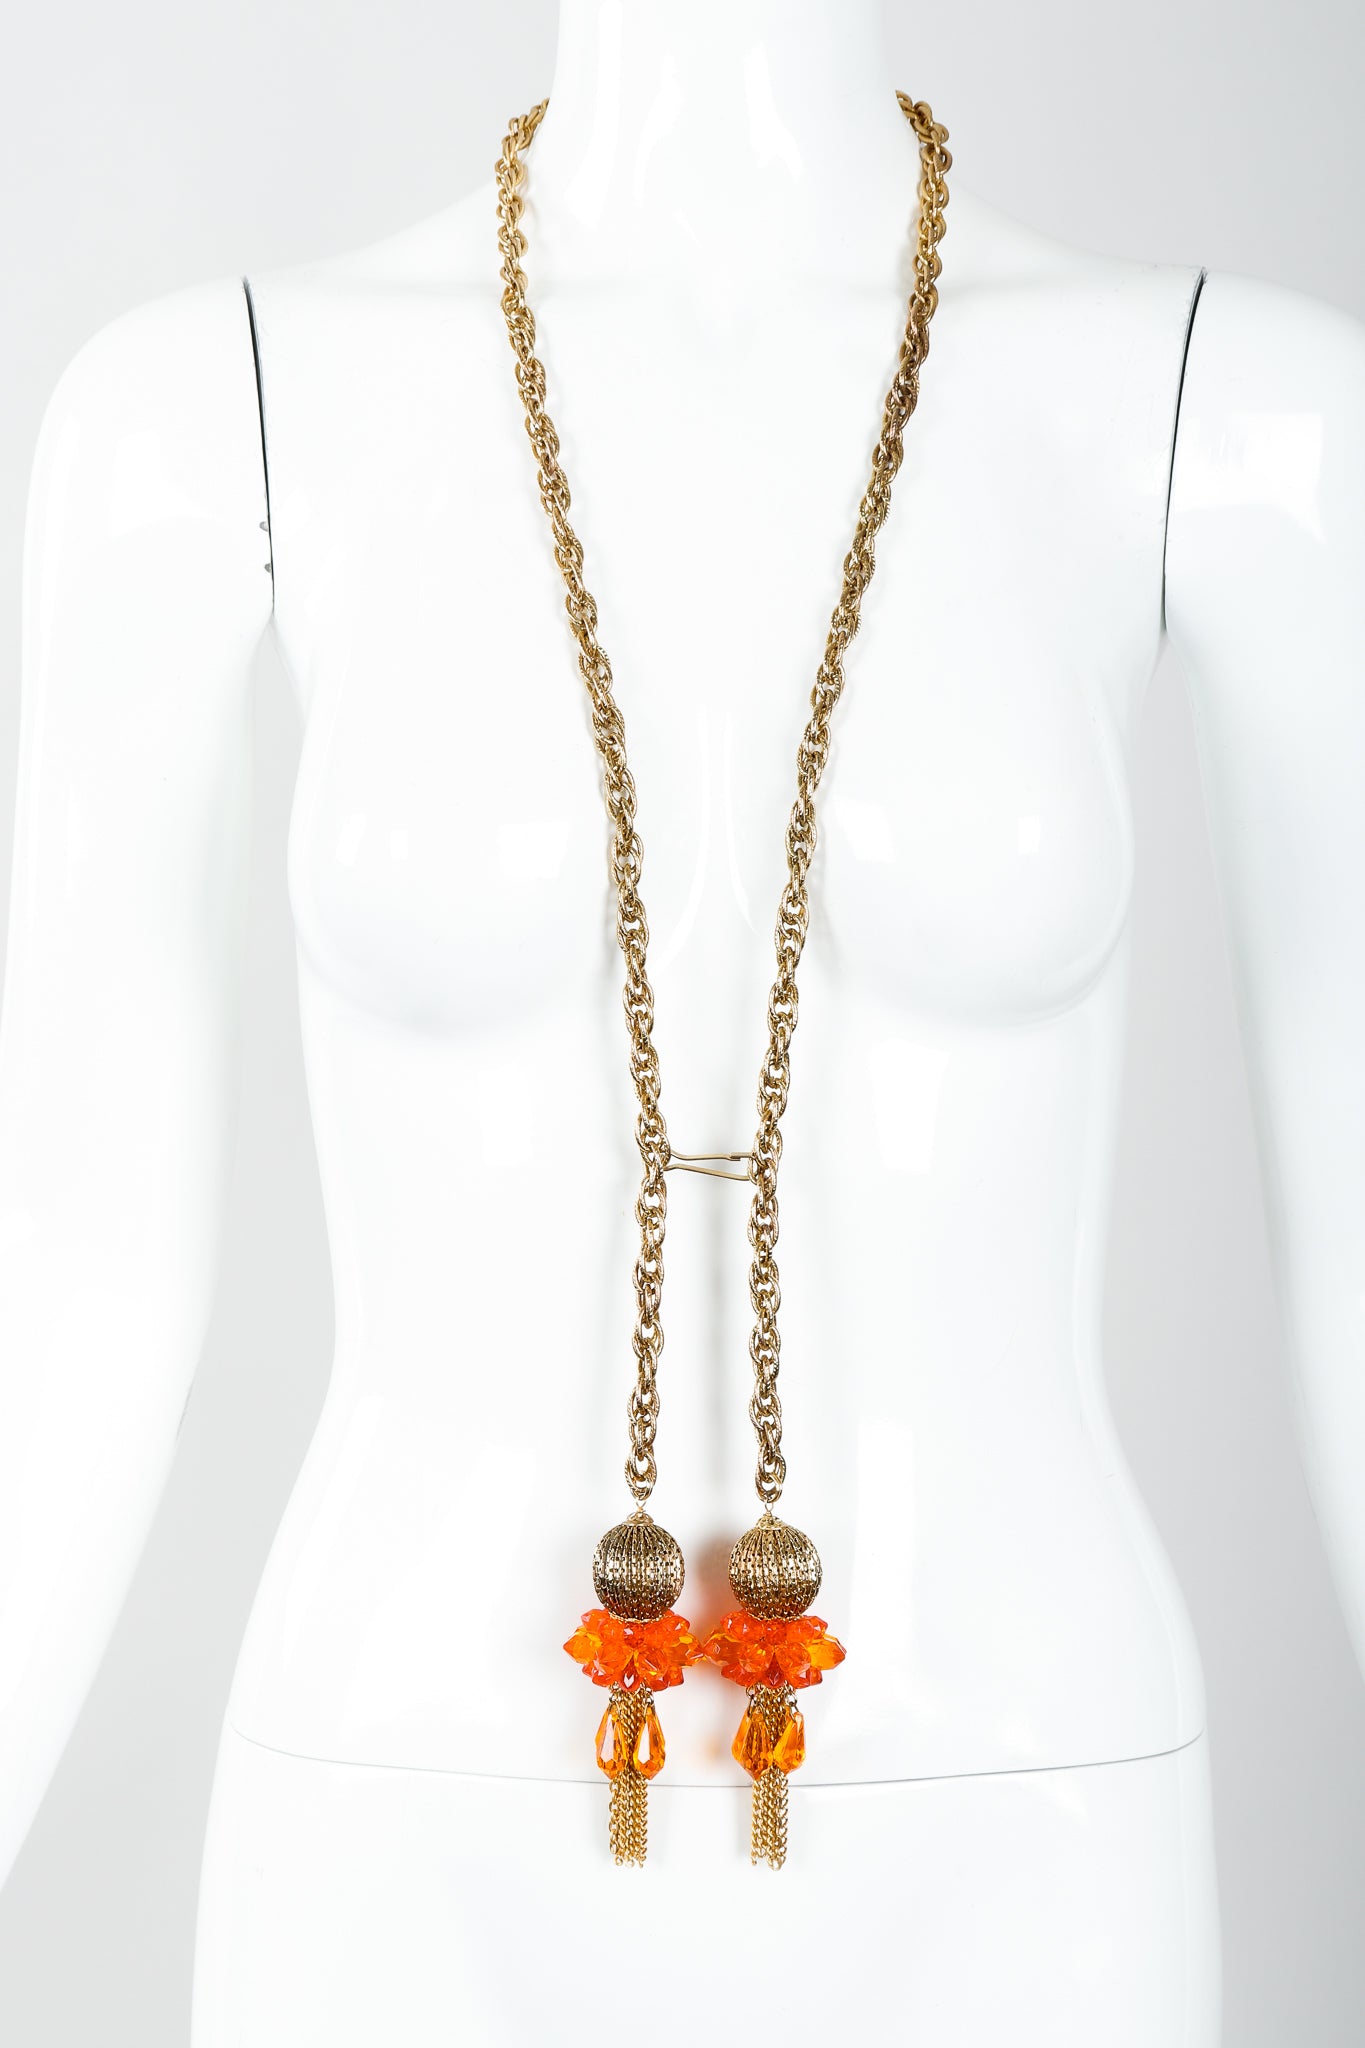 Vintage Unsigned Fiery Orange Beaded Tassel Wrap Necklace on Mannequin at Recess